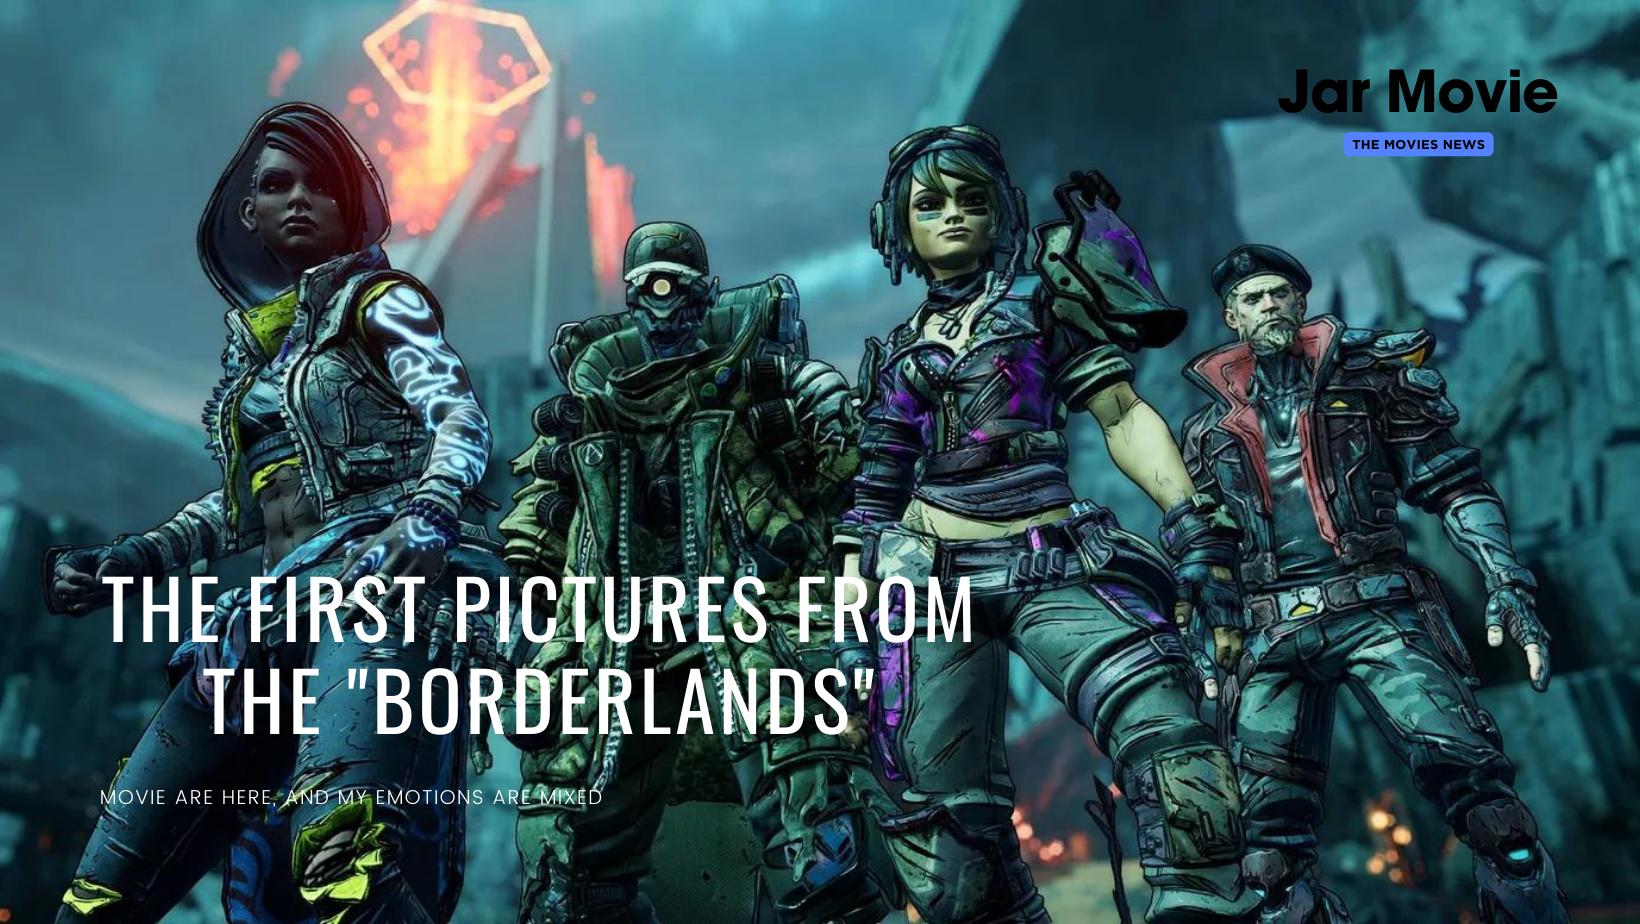 The First Pictures From The Borderlands Movie Are Here, And My Emotions Are Mixed